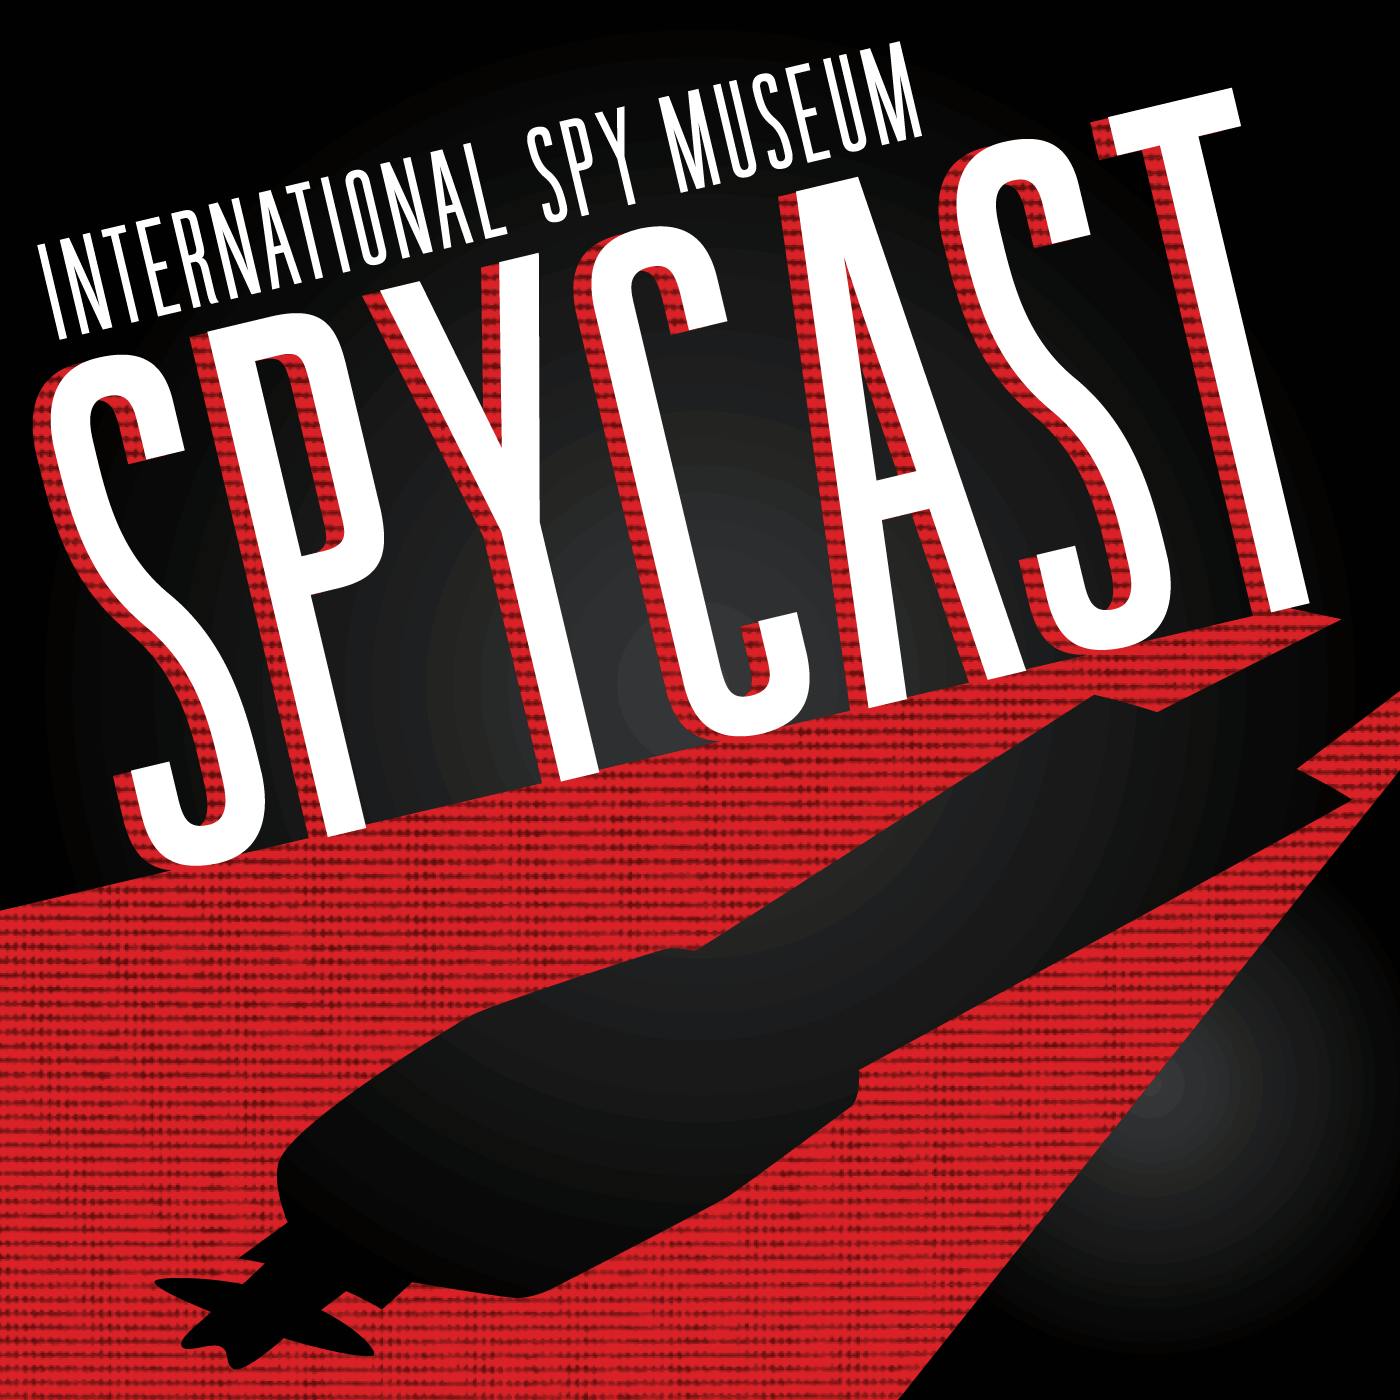 Darknet Diaries – Presenting: Spycast “Black Ops: The Life of a Legendary CIA Shadow Warrior”